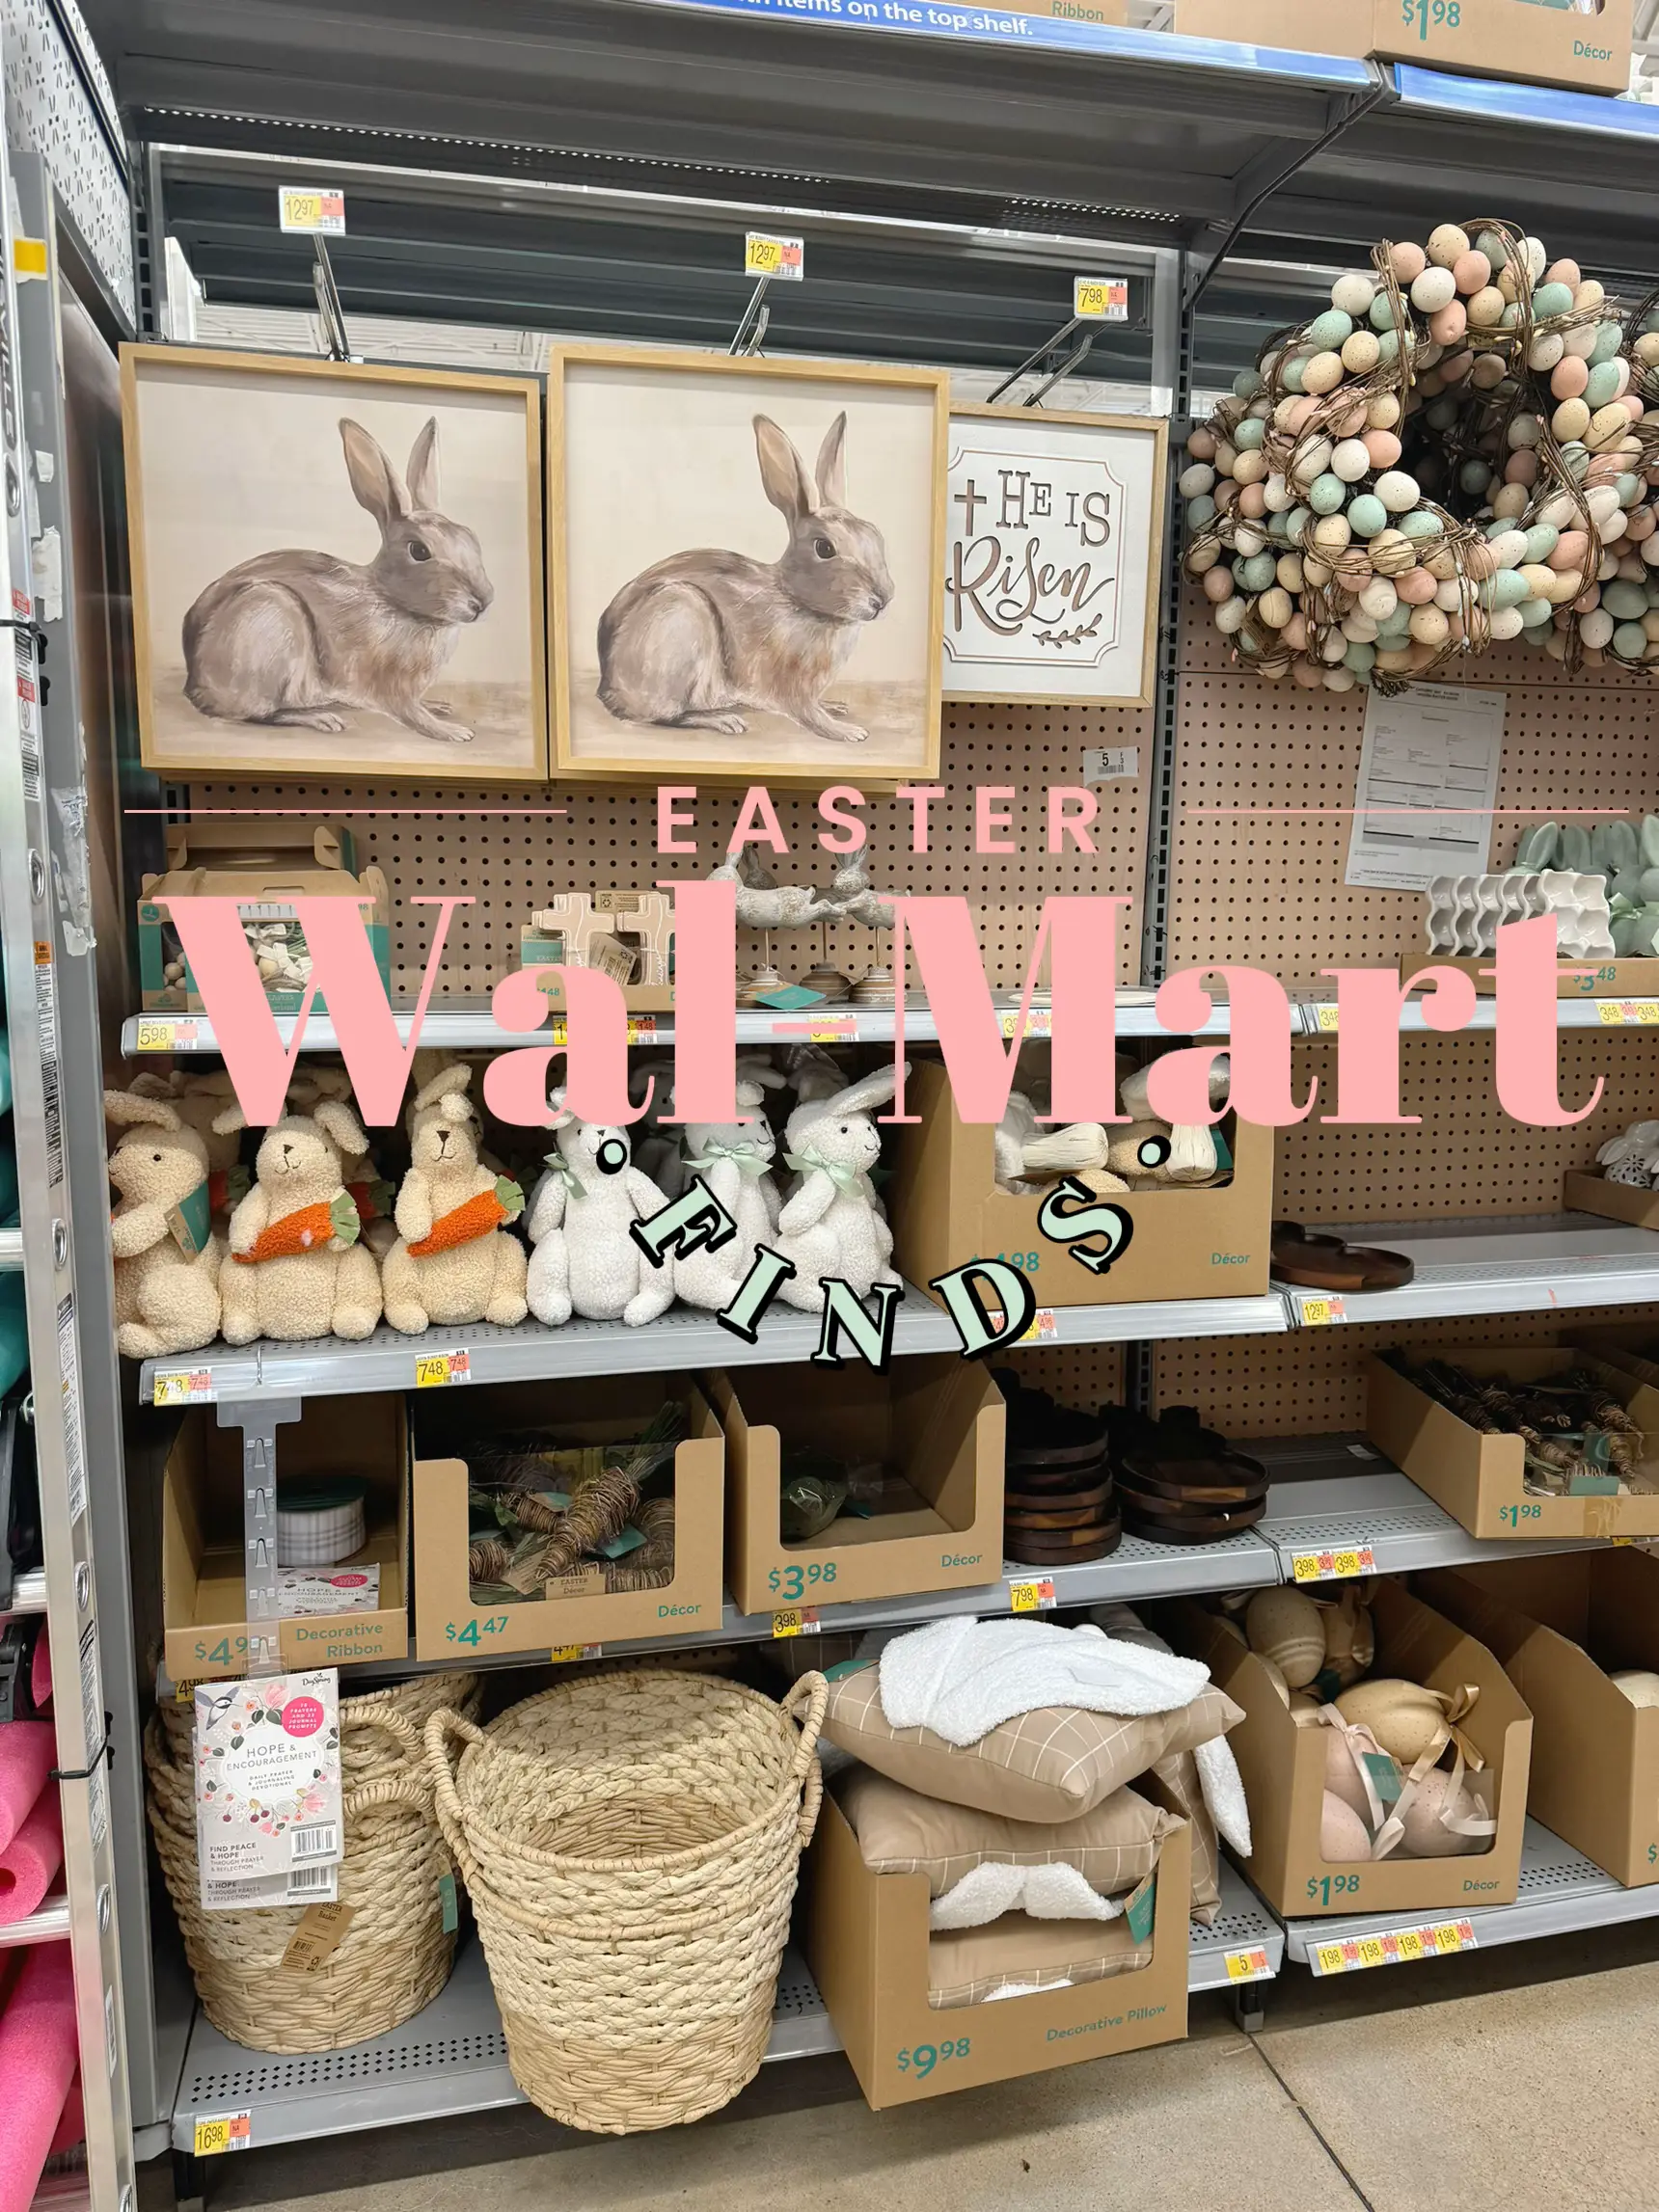 Target Has New Easter Decor Starting at $3